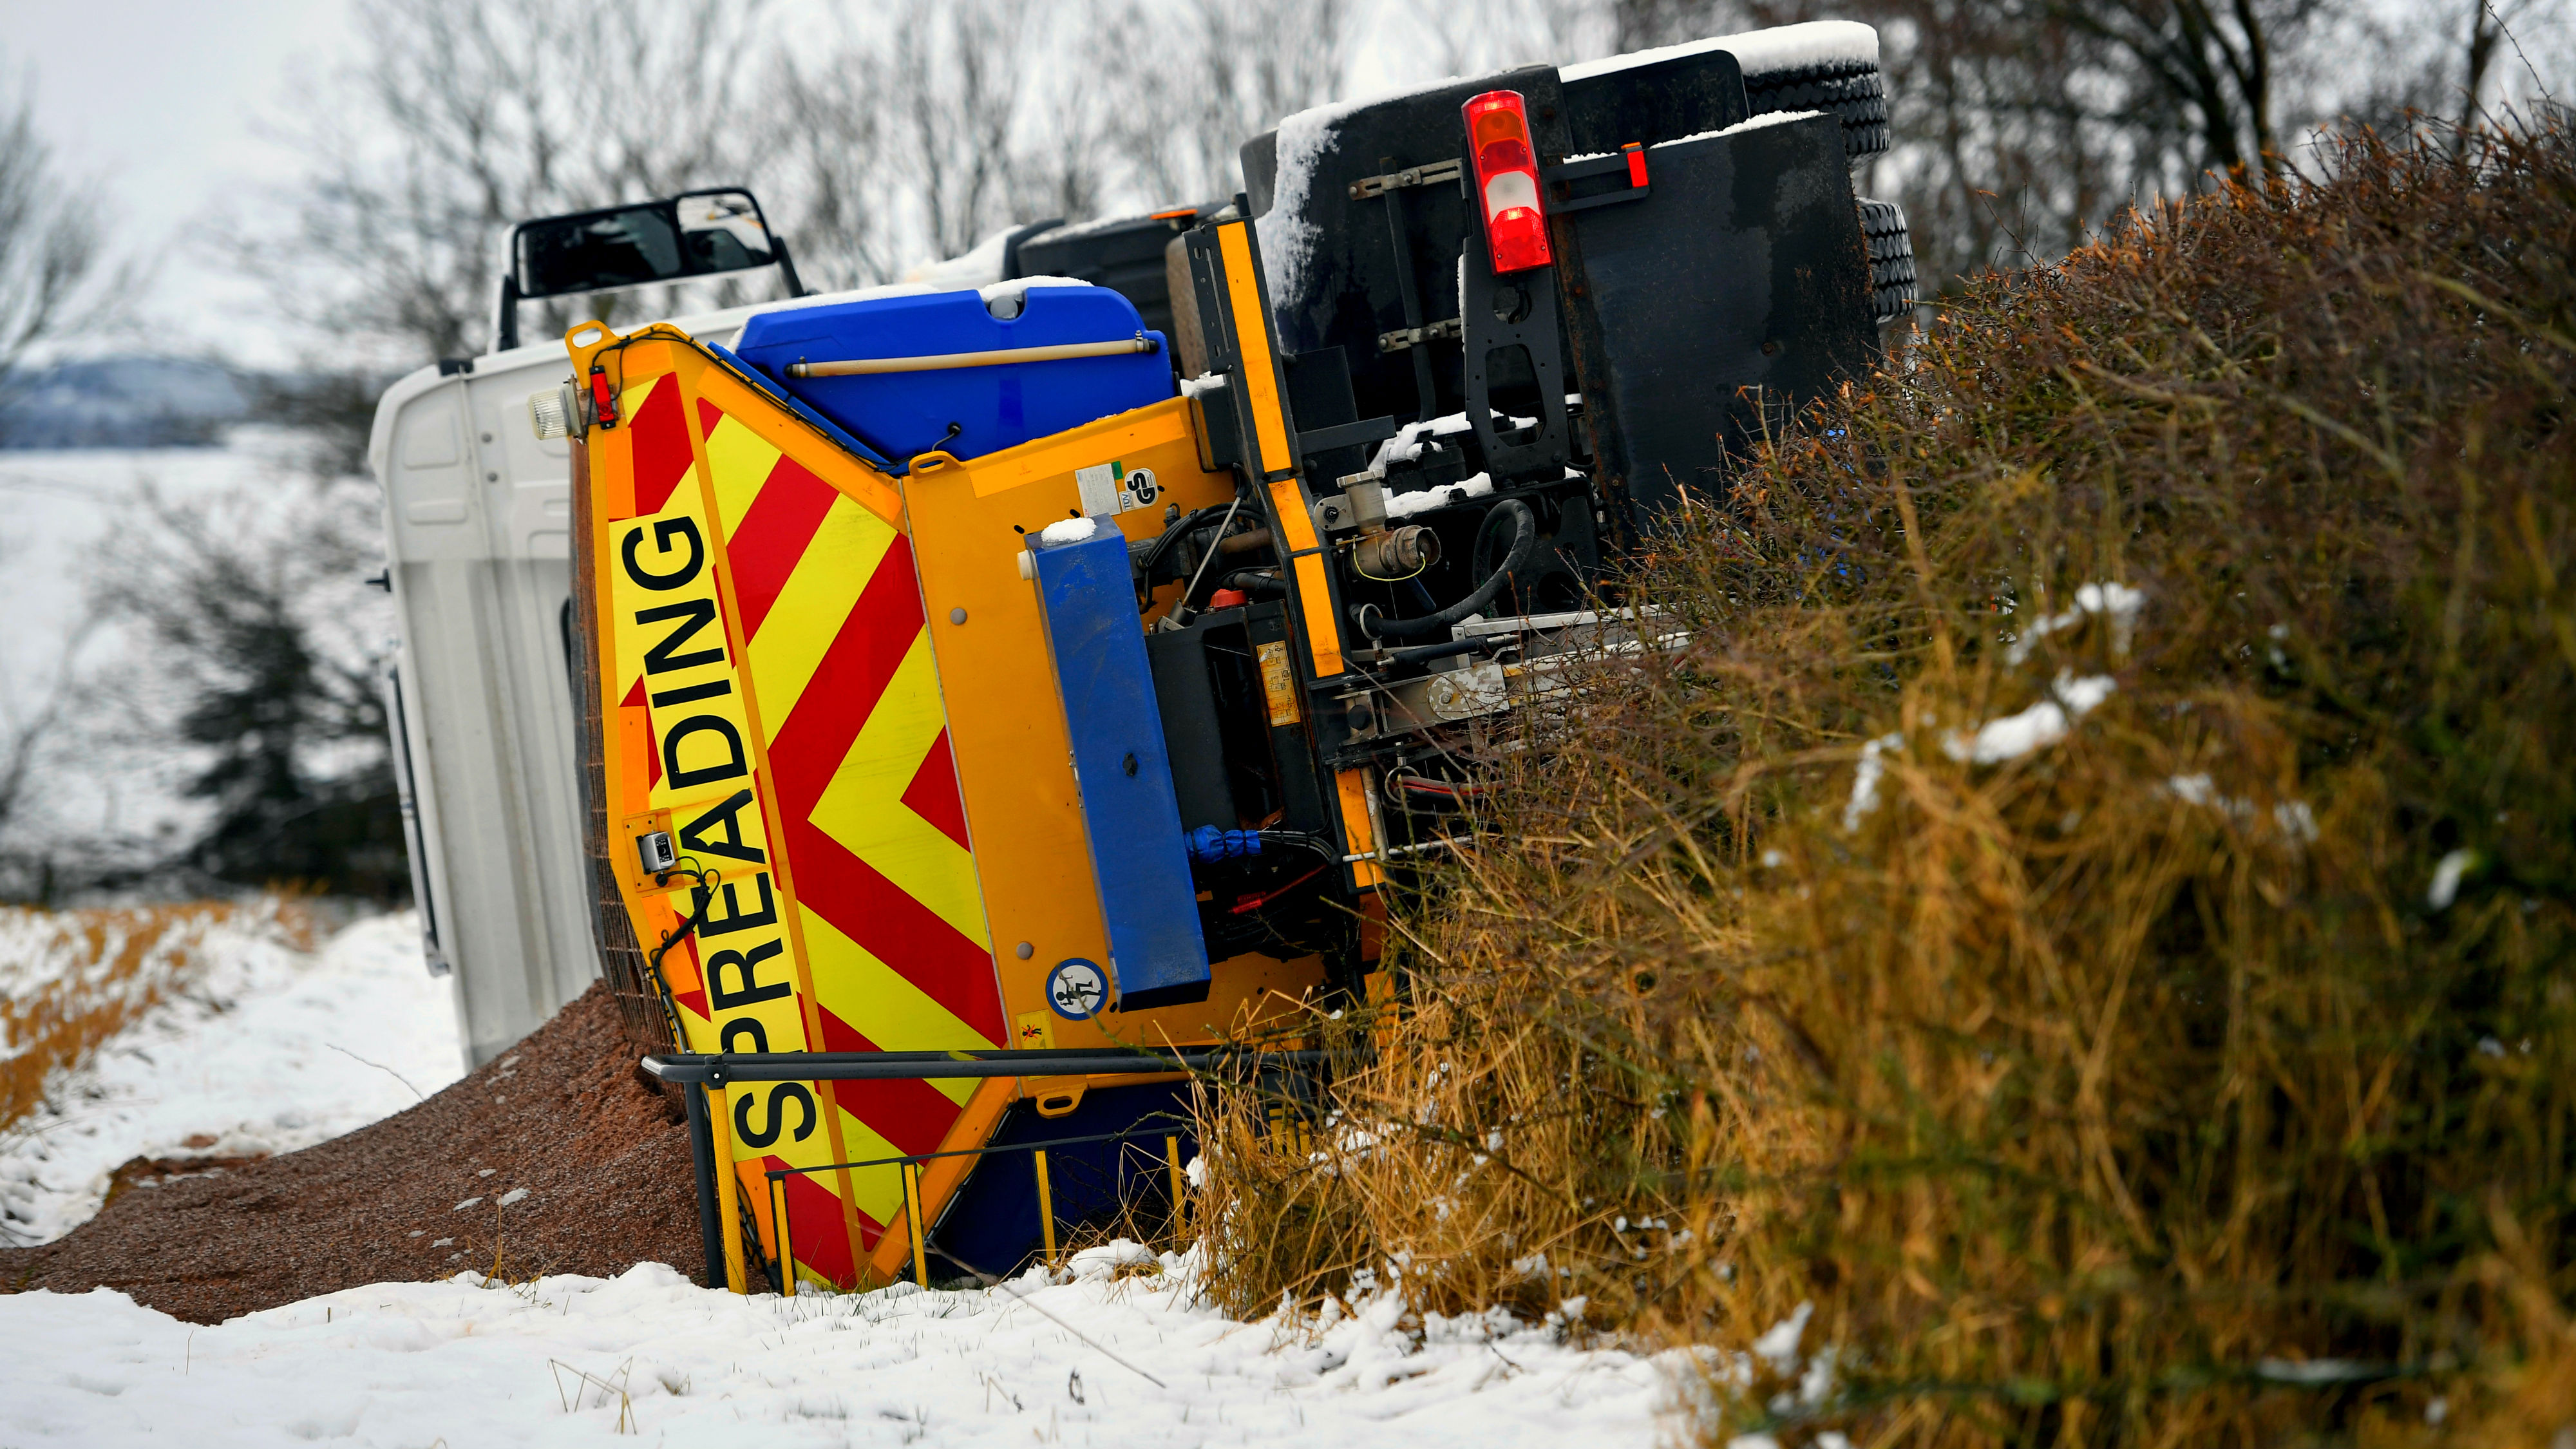 A gritting lorry overturns near Balfron, in Sterlingshire, as Storm Doris brings weather chaos to the UK